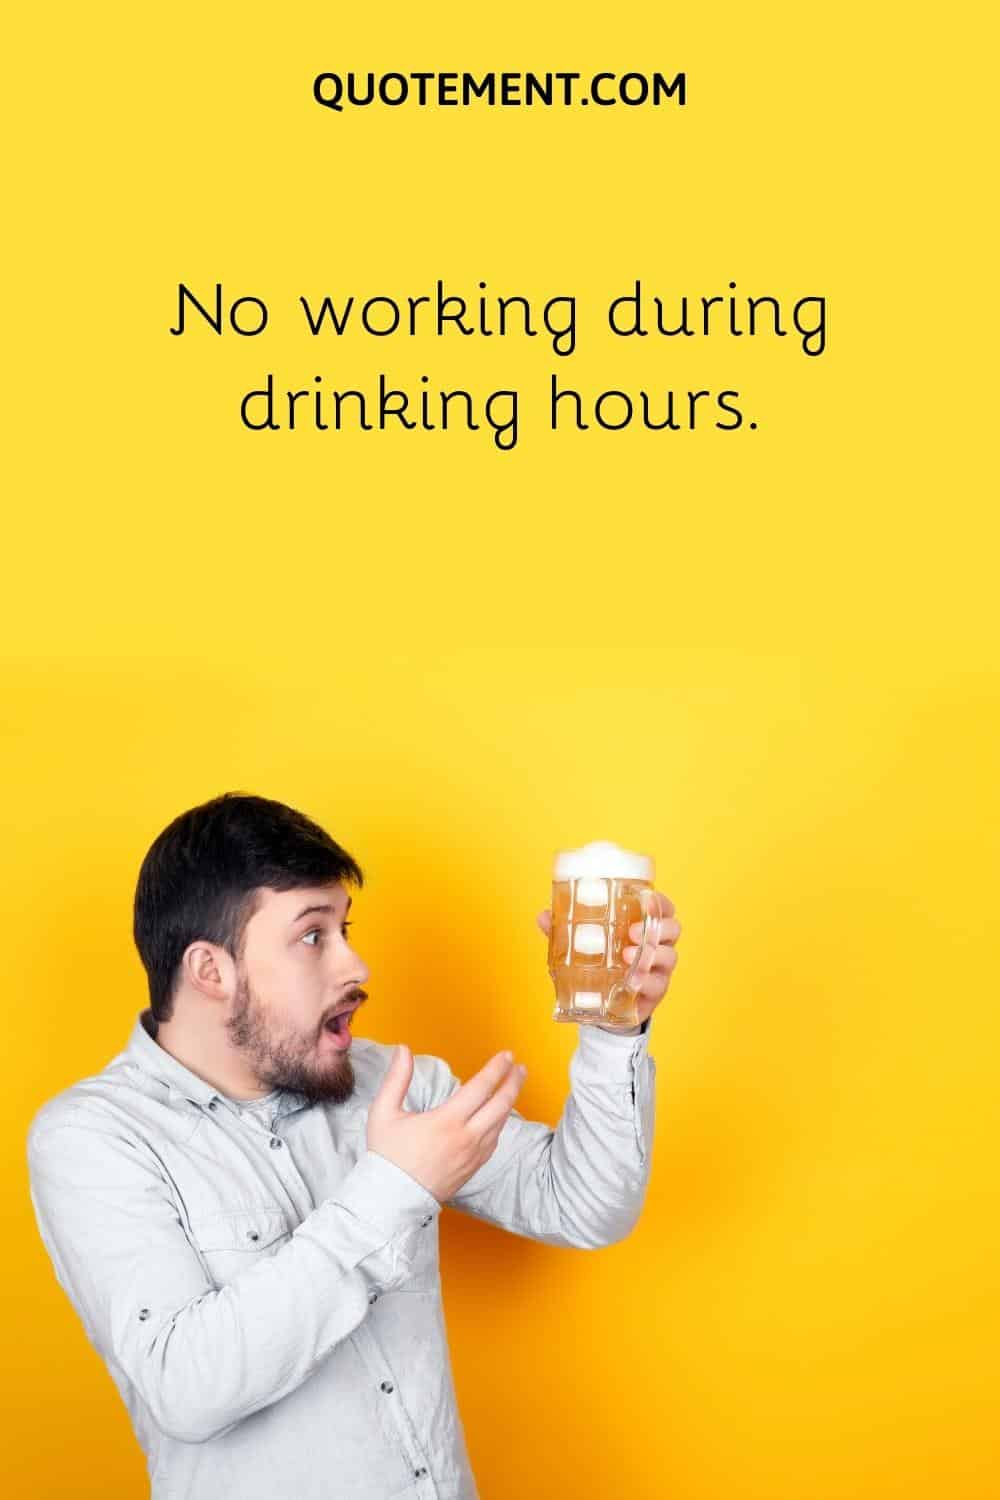 No working during drinking hours.